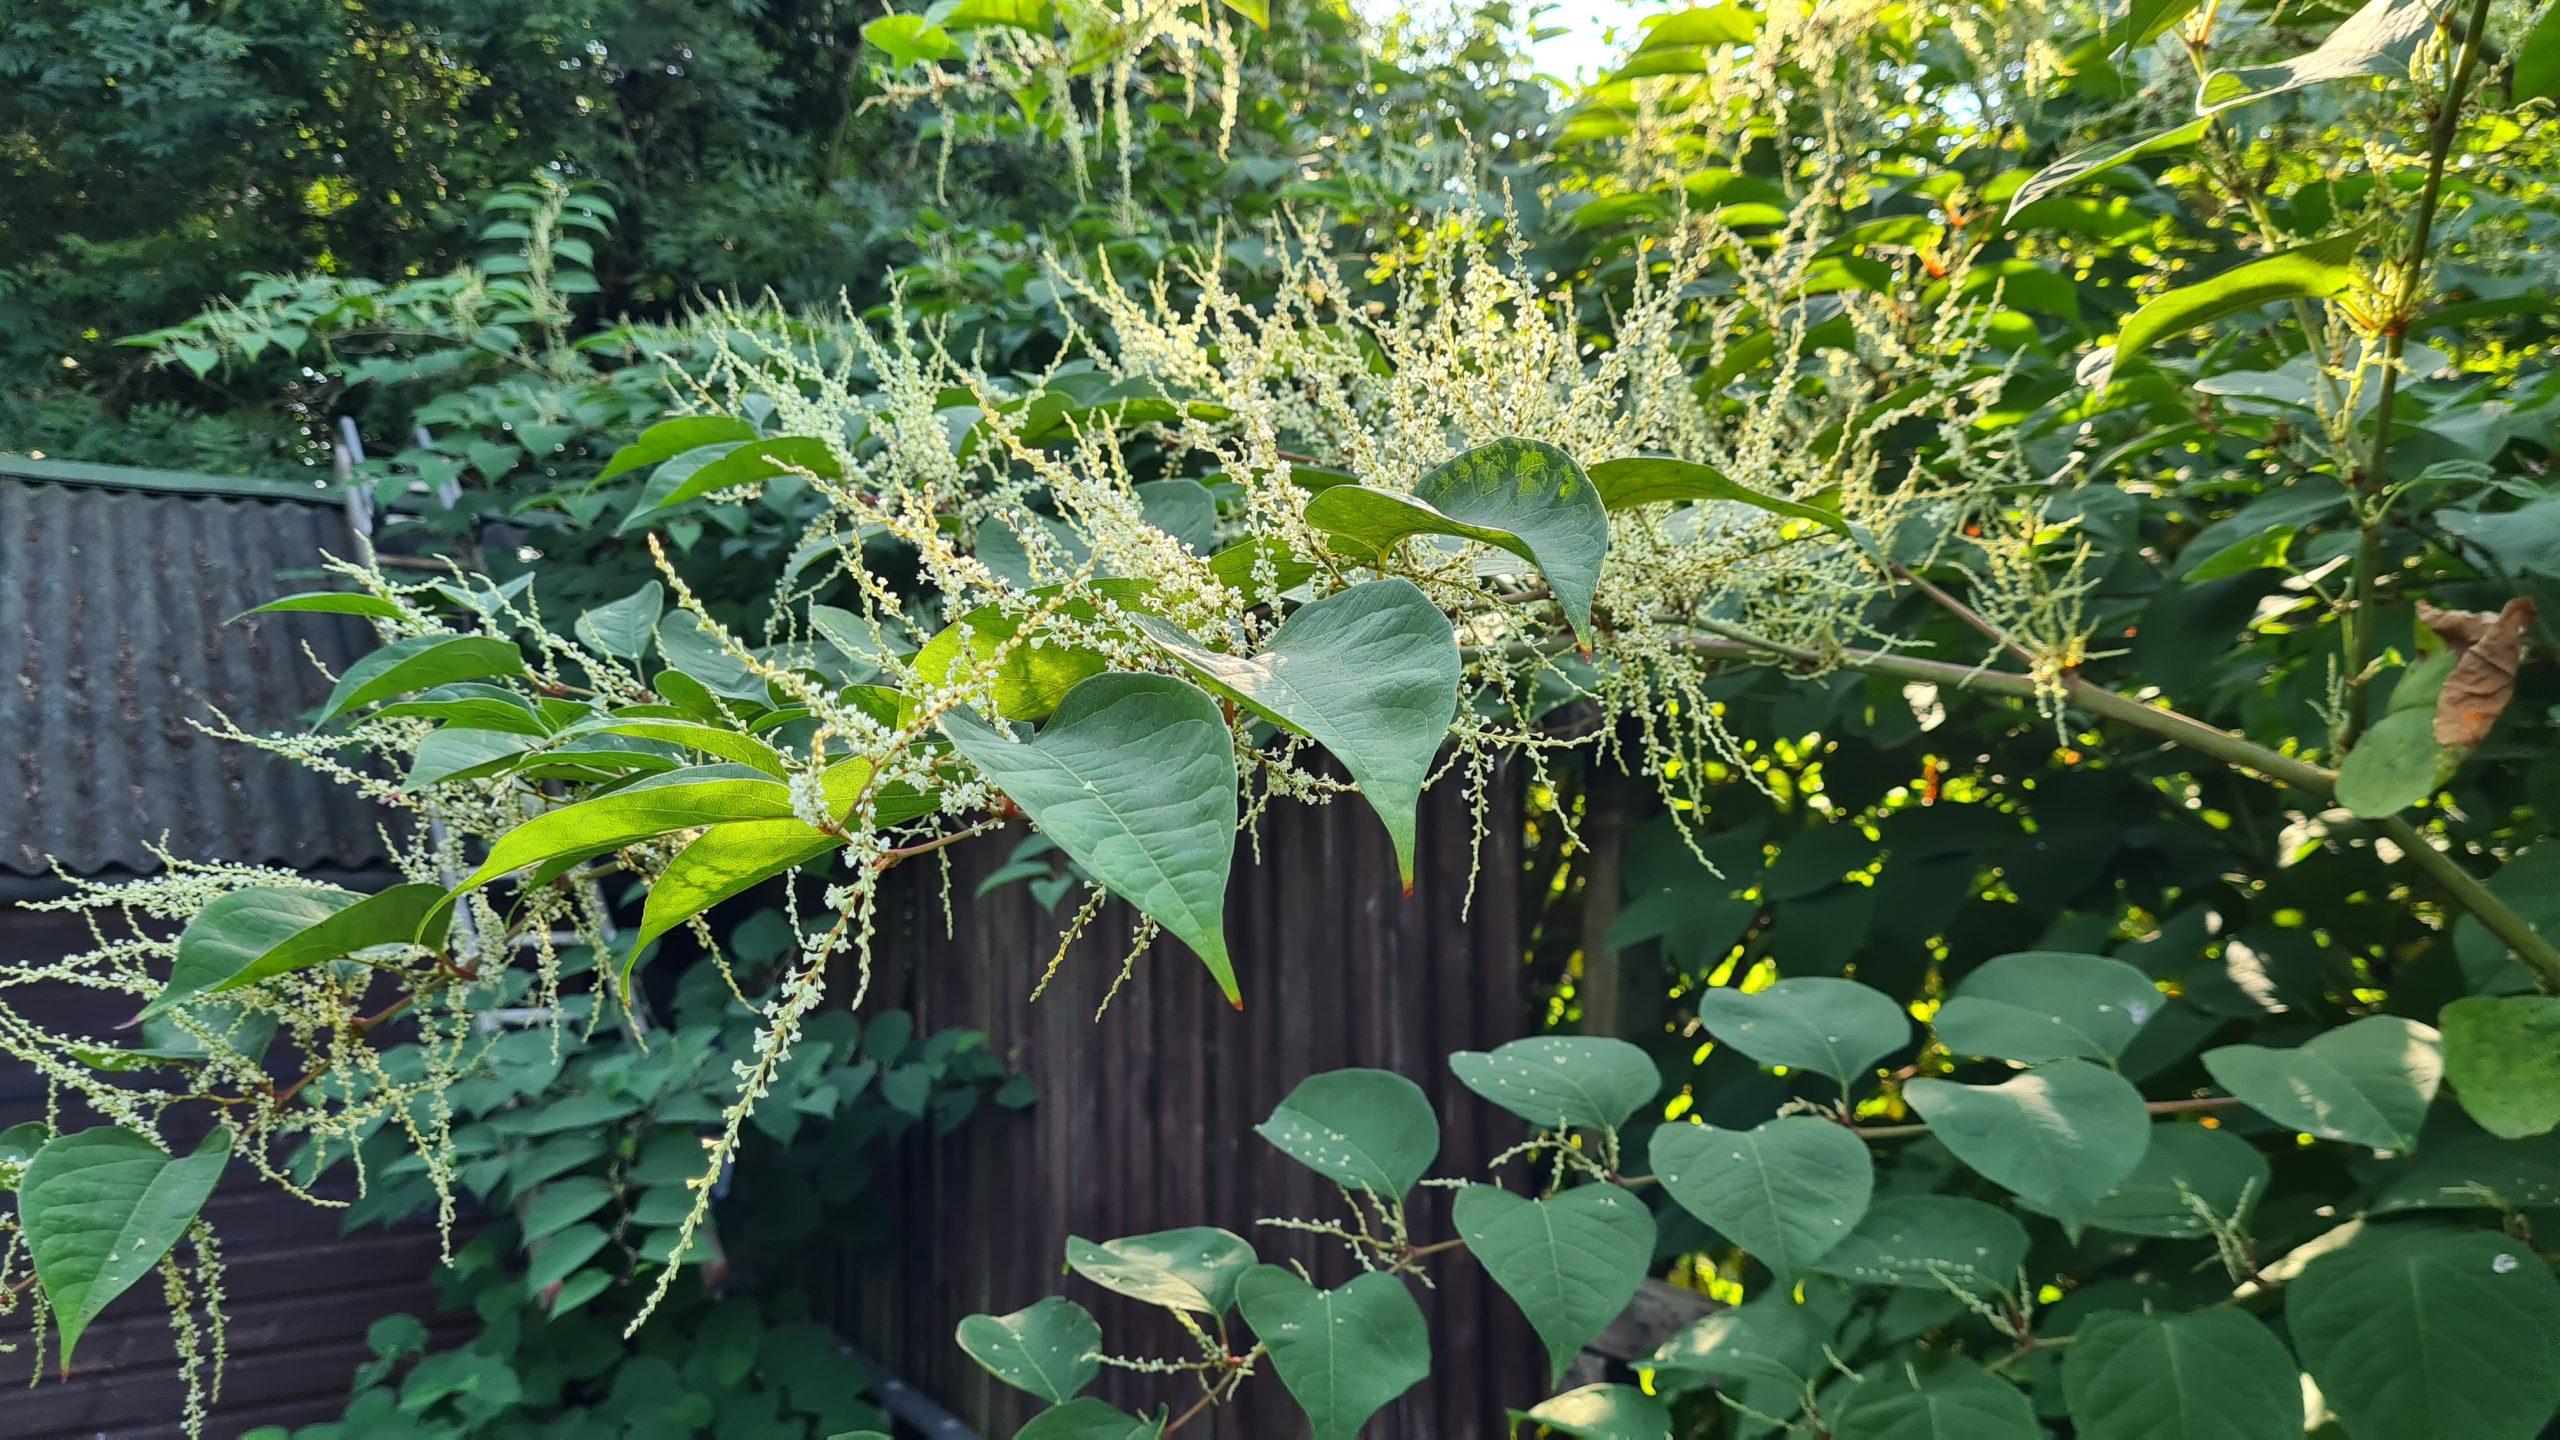 Japanese knotweed ready to flower and spread its seed